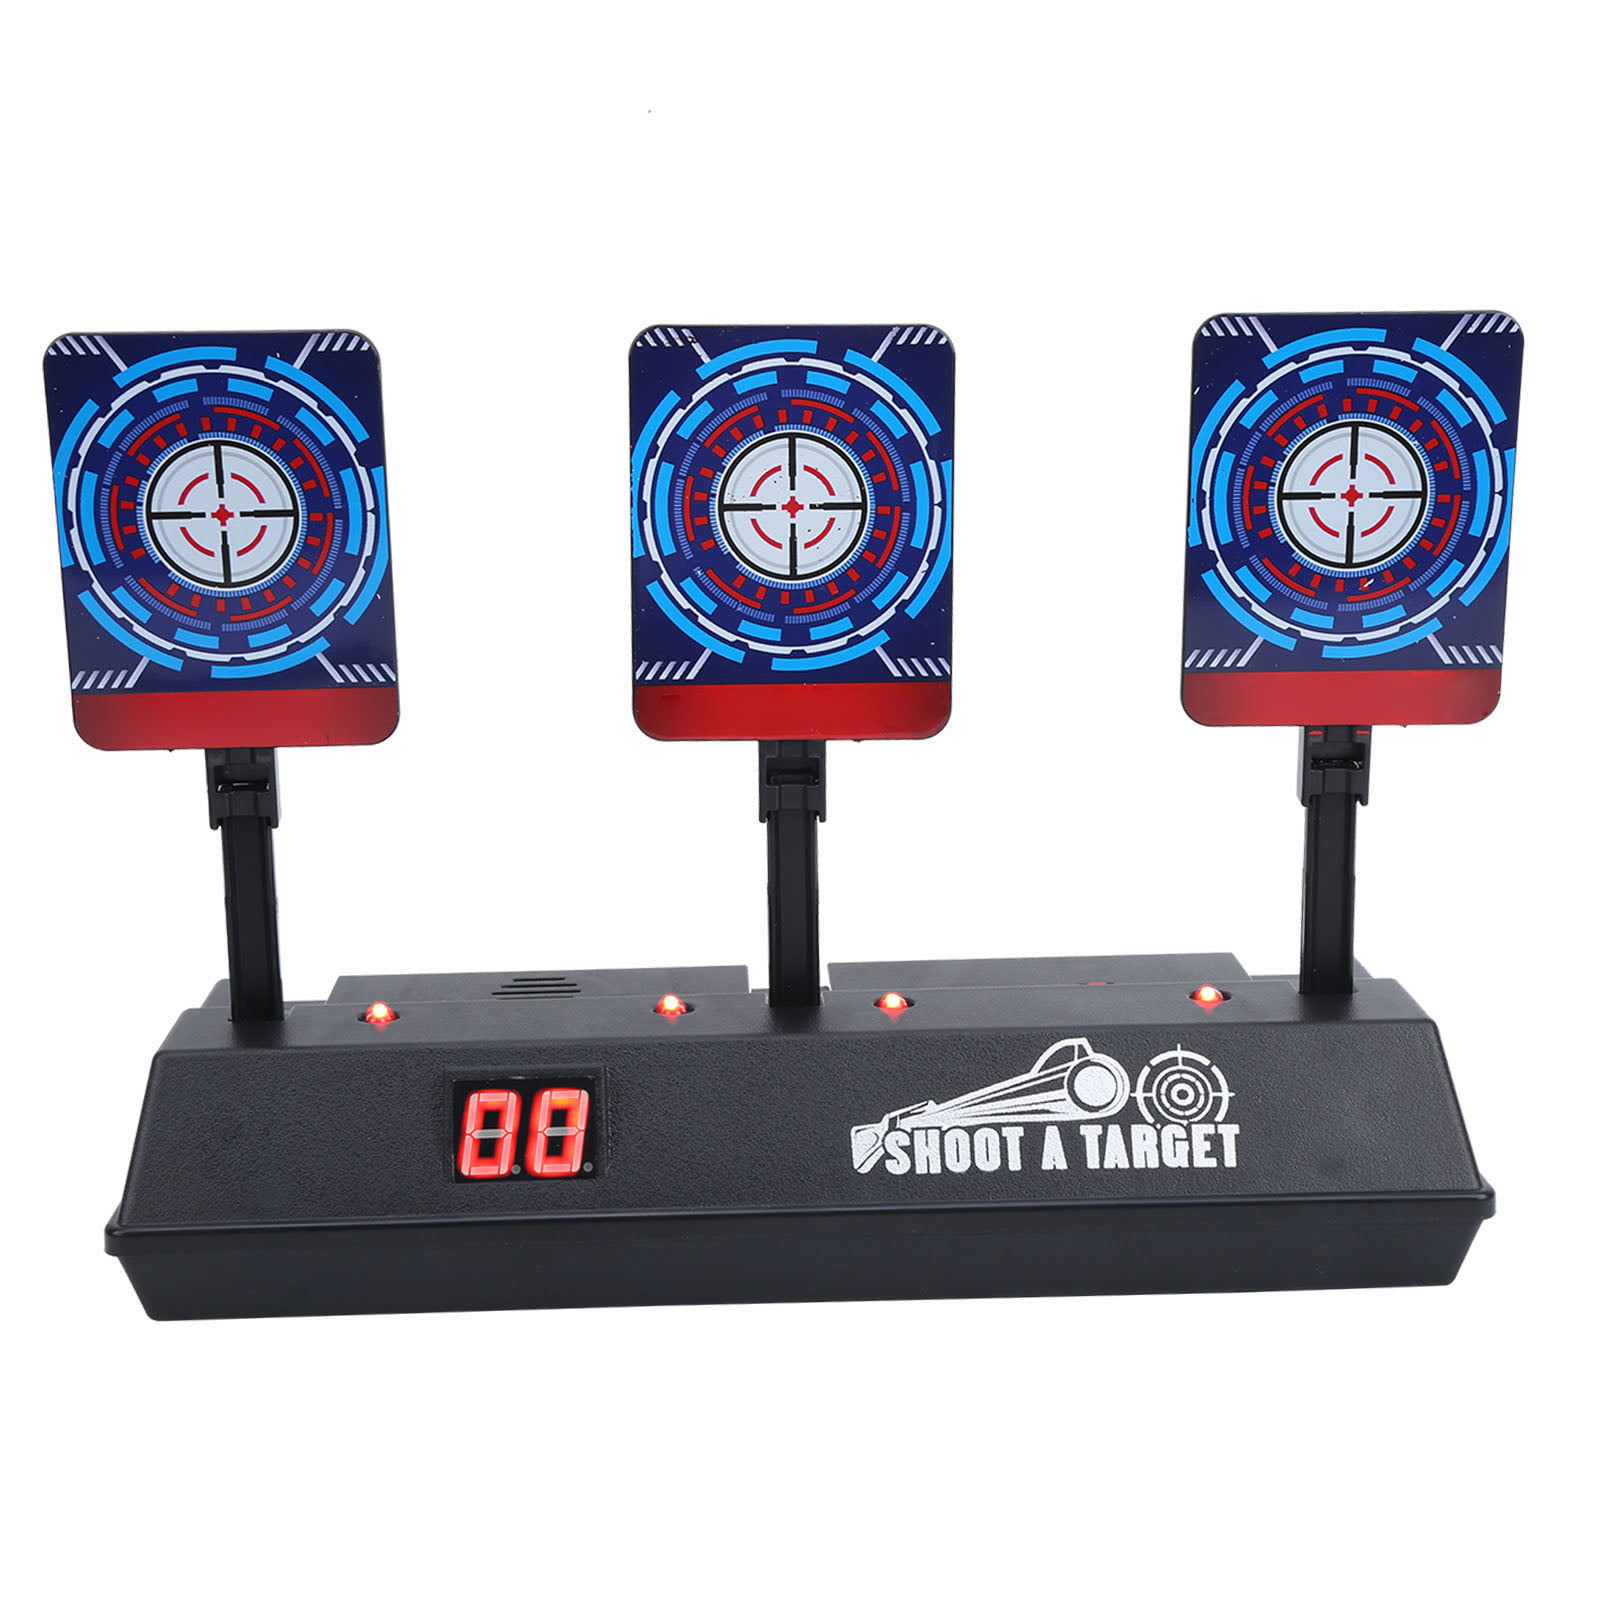 Electronic 3 Shooting Target Auto Reset Practice Kid's Gift With Light & Sound 